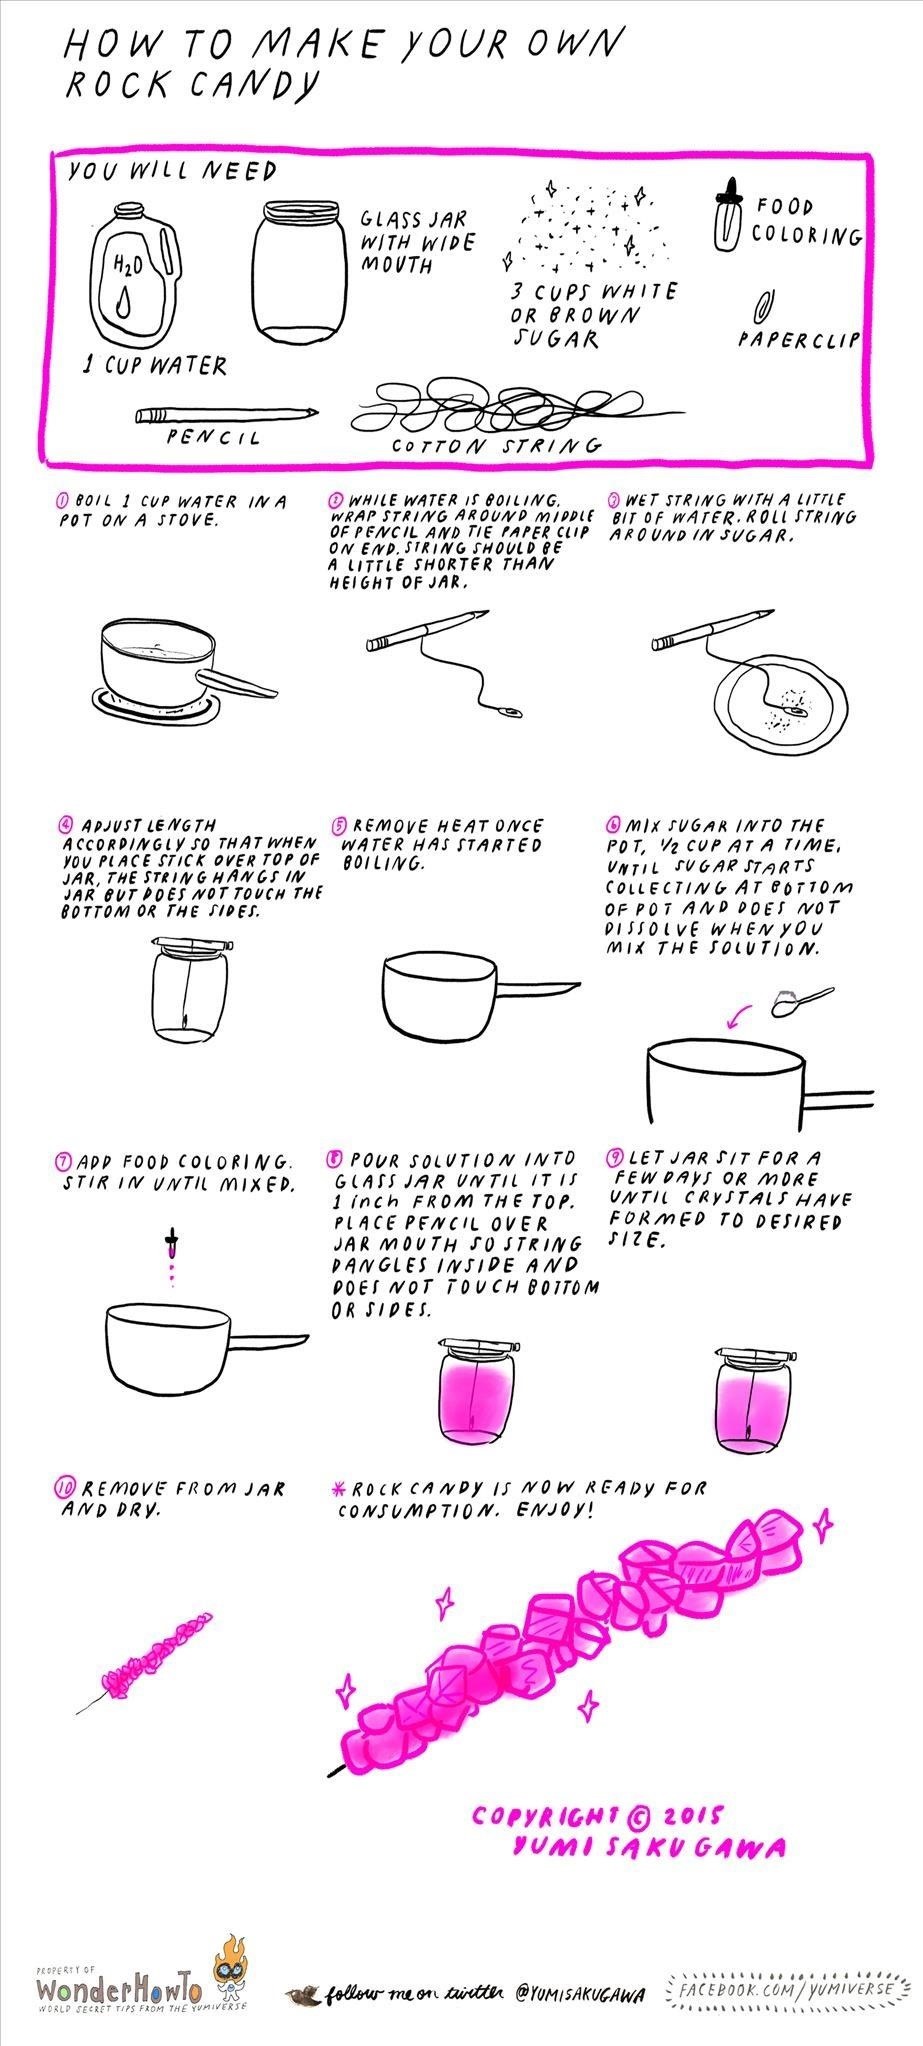 How to Make DIY Rock Candy at Home « The Secret Yumiverse